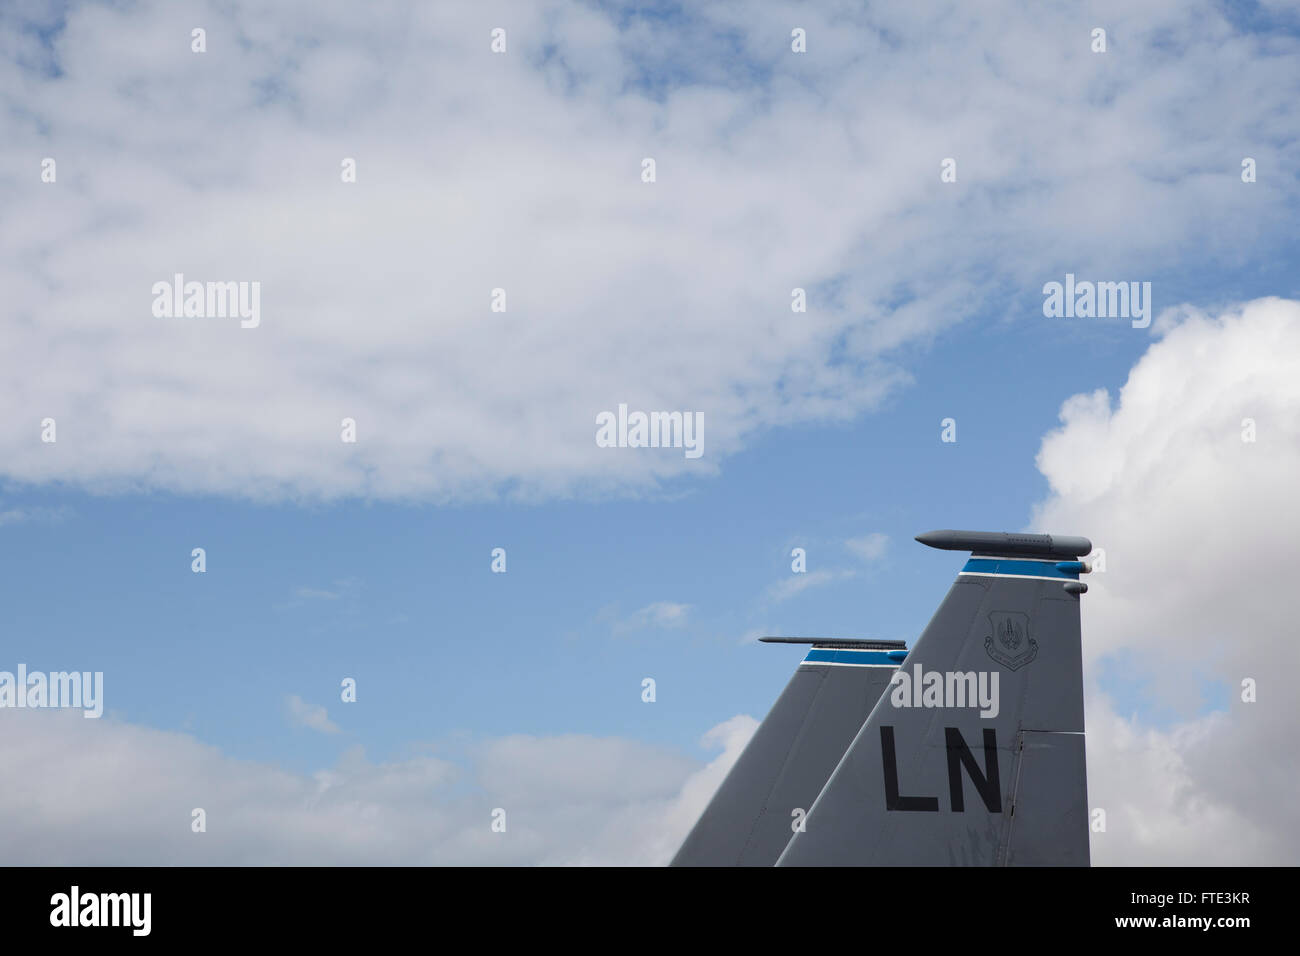 The tail of an aeroplane or fighter aircraft as it sits on the runway at a static display, showing ther typical grey livery and identification markings. Stock Photo